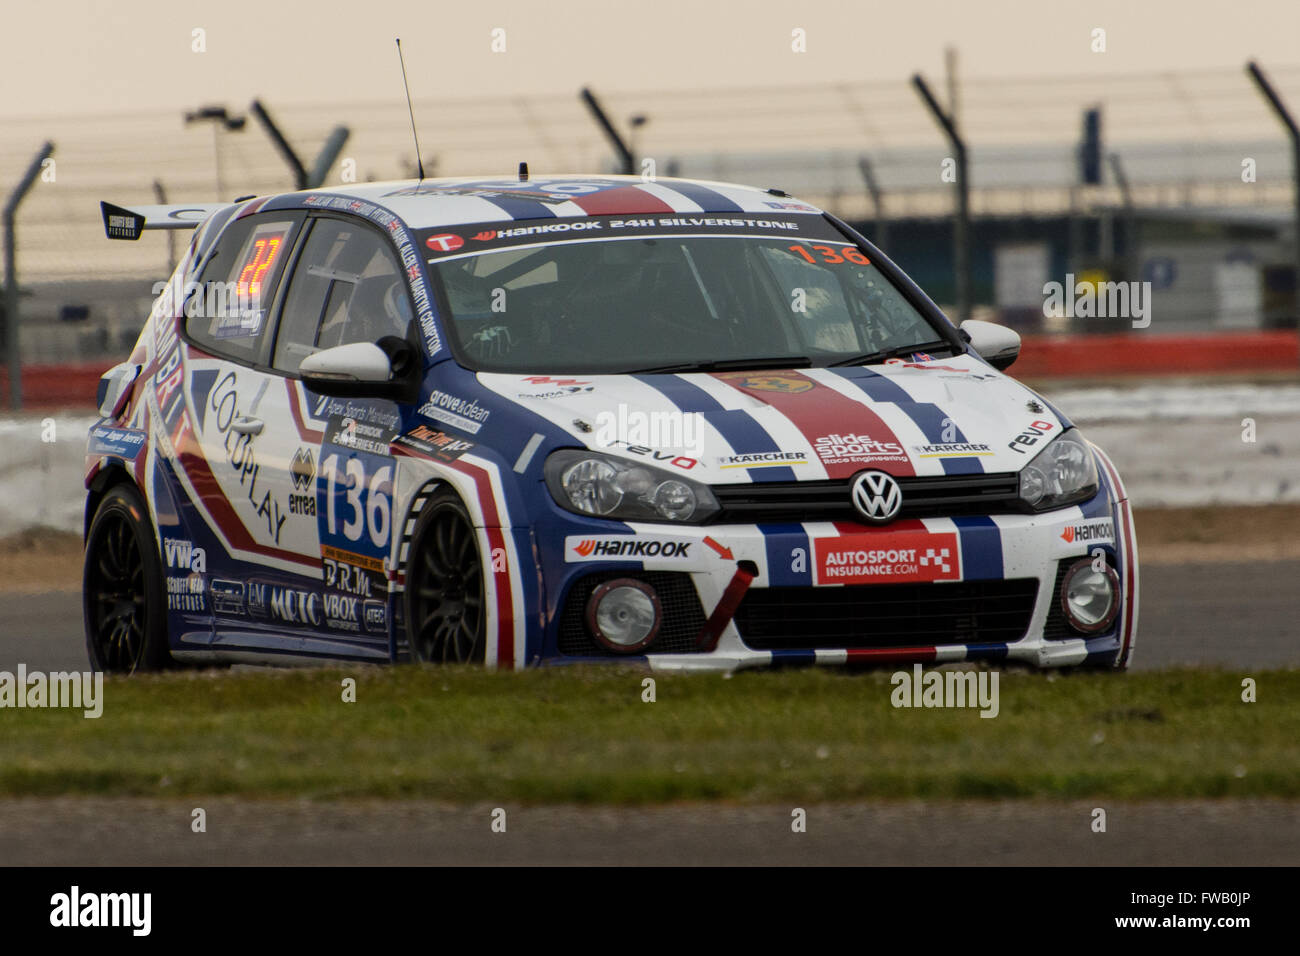 Towcester, Northamptonshire, UK. 2nd April, 2016. Team BRIT Volkswagen GTi during the Hankook 24 Hours Touring Car Series at Silverstone Circuit (Photo by Gergo Toth / Alamy Live News) Stock Photo